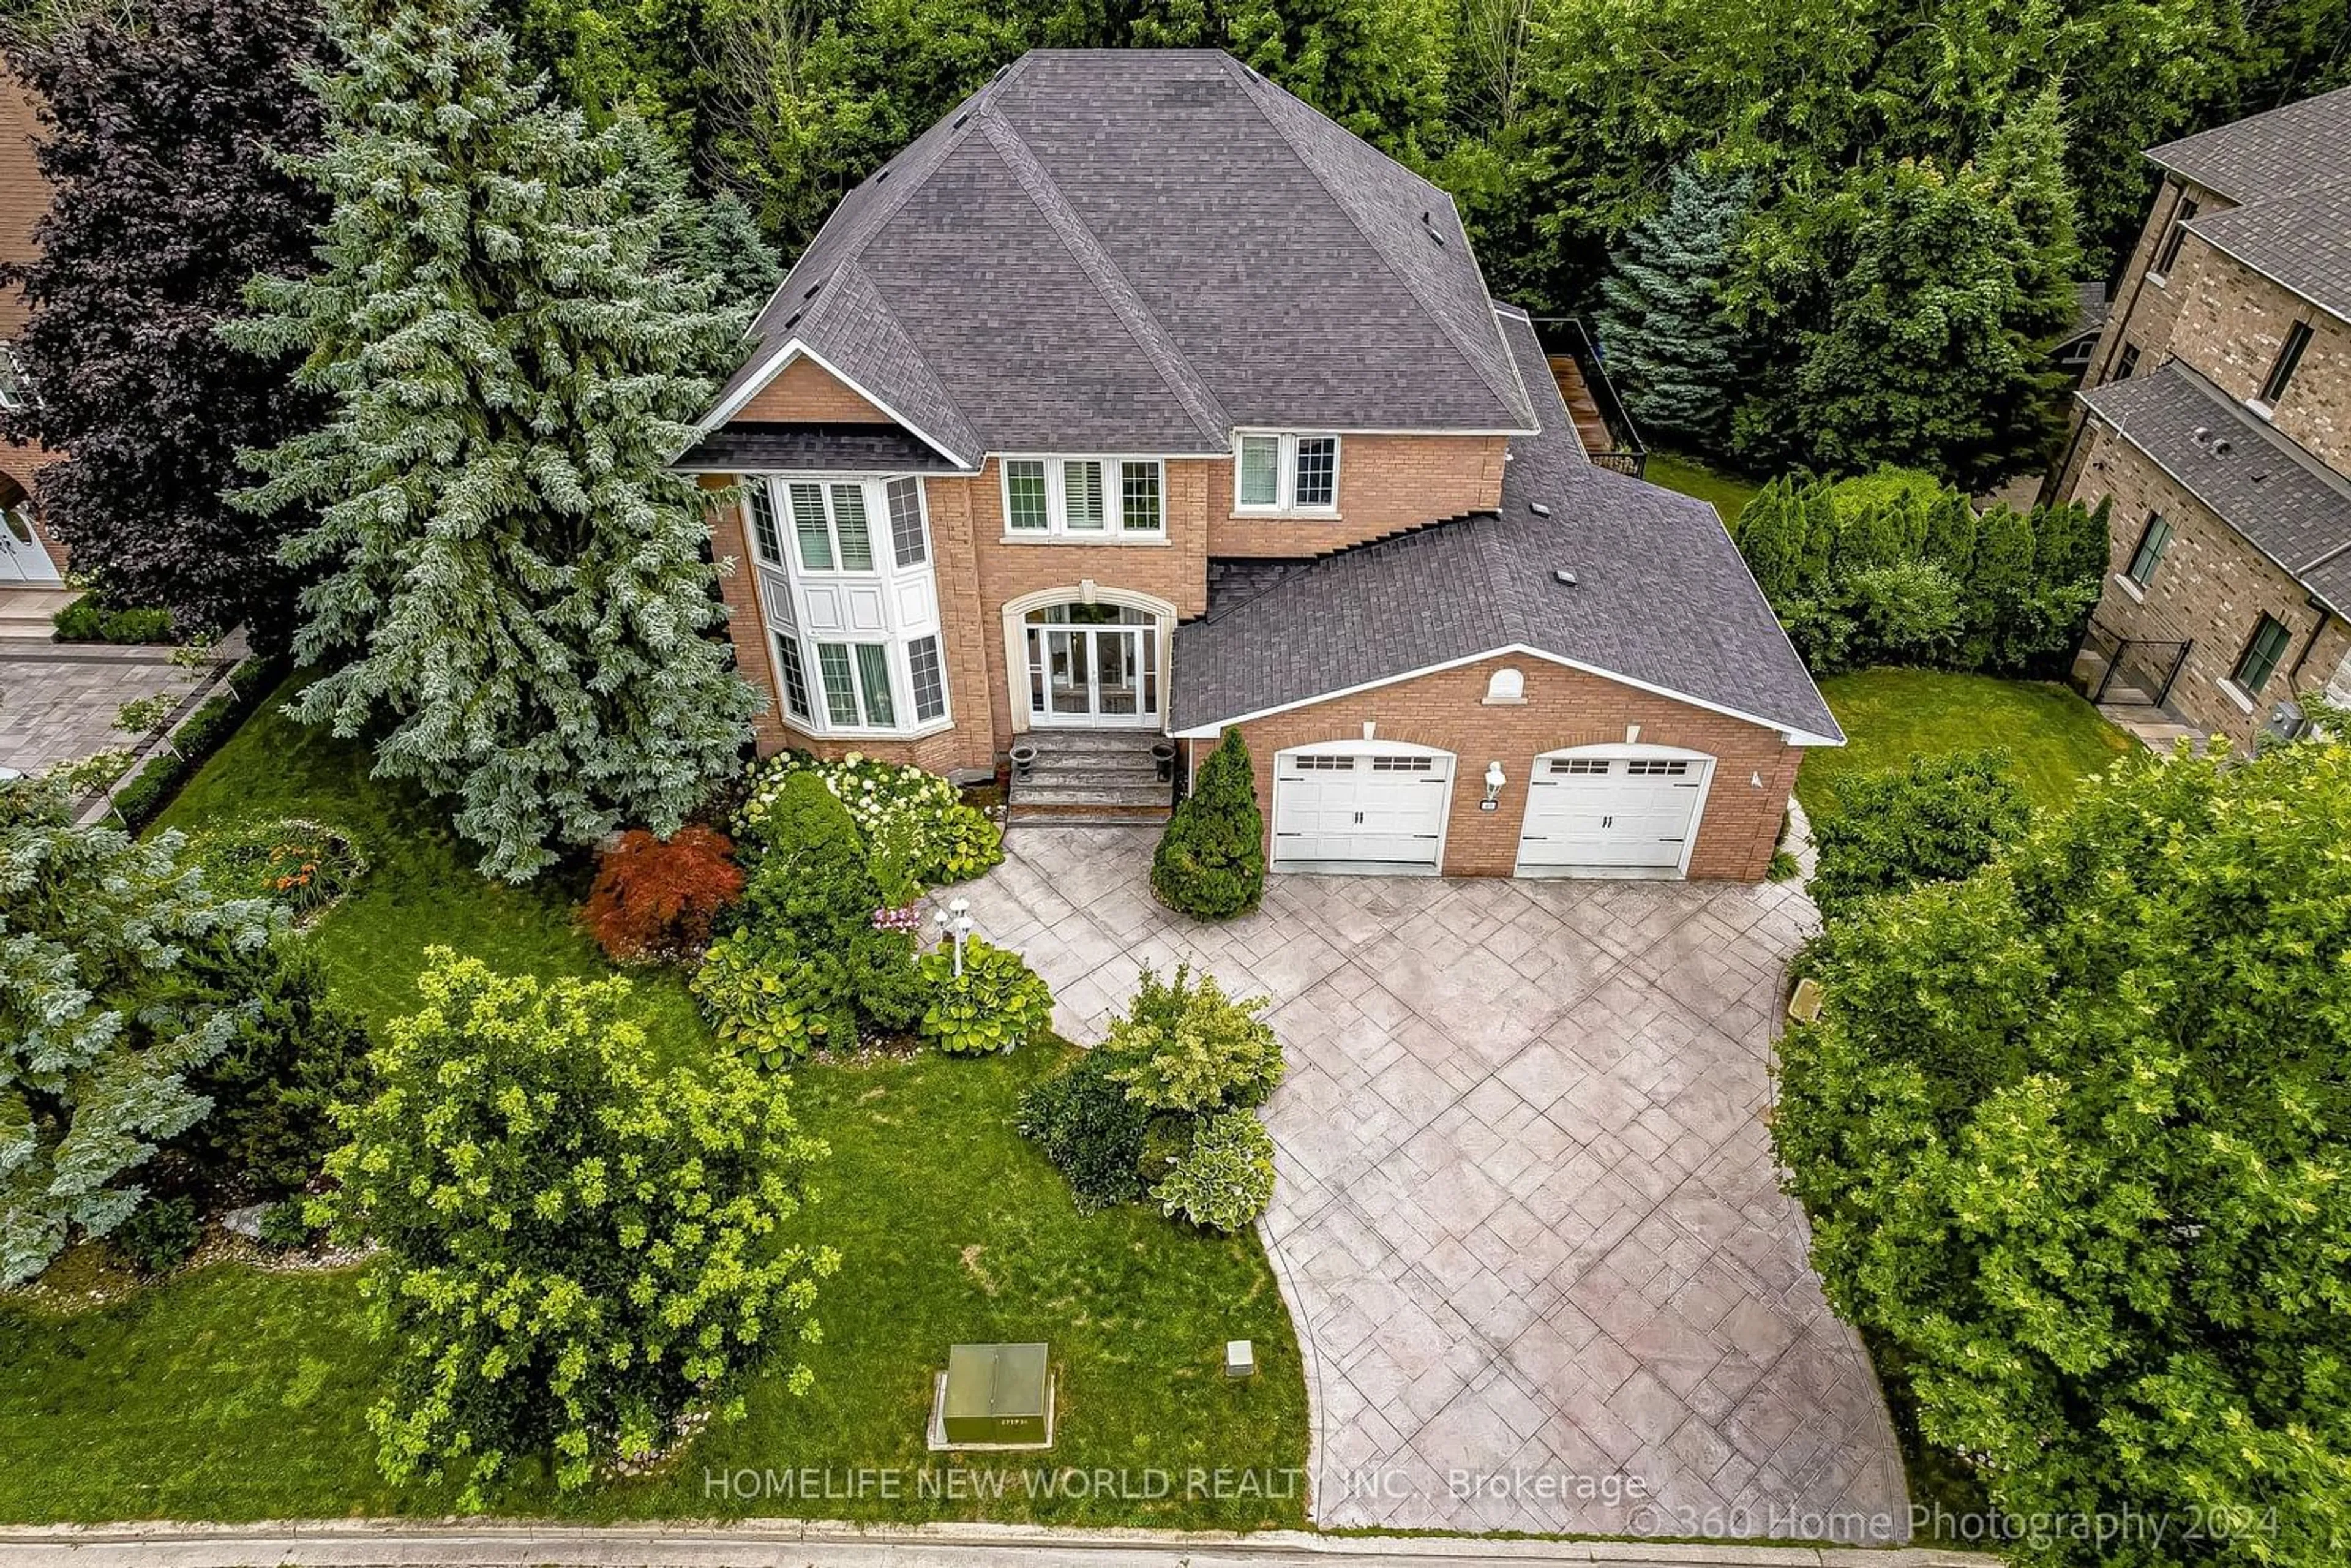 Home with brick exterior material for 37 Heatherwood Cres, Markham Ontario L3R 8W6